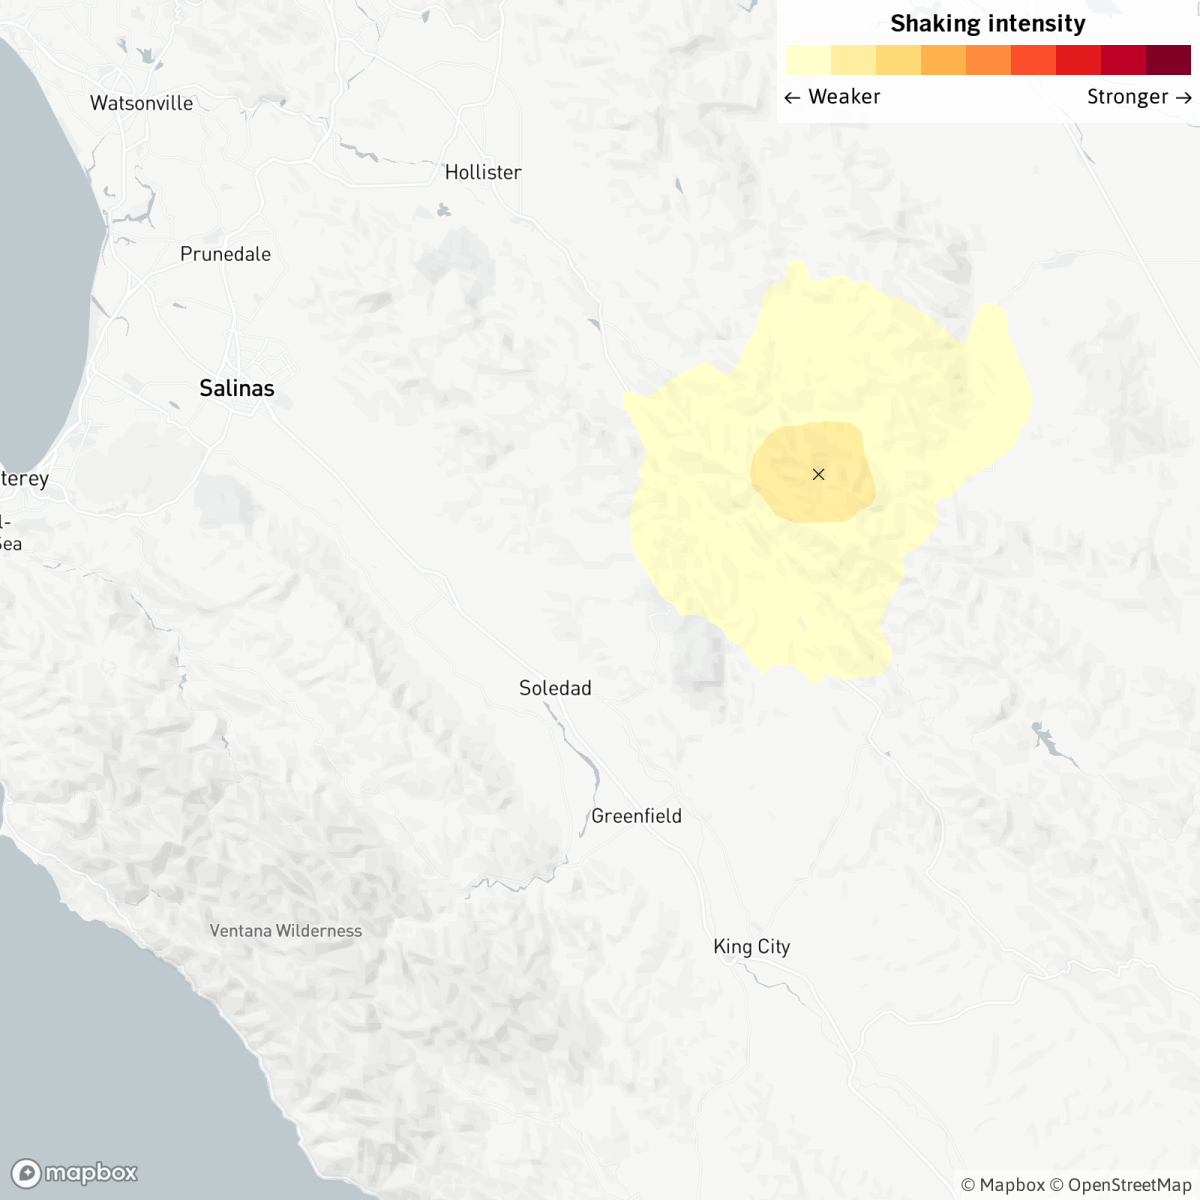 An earthquake was reported Tuesday at 12:22 p.m. 17 miles from Soledad, Calif., according to the U.S. Geological Survey.